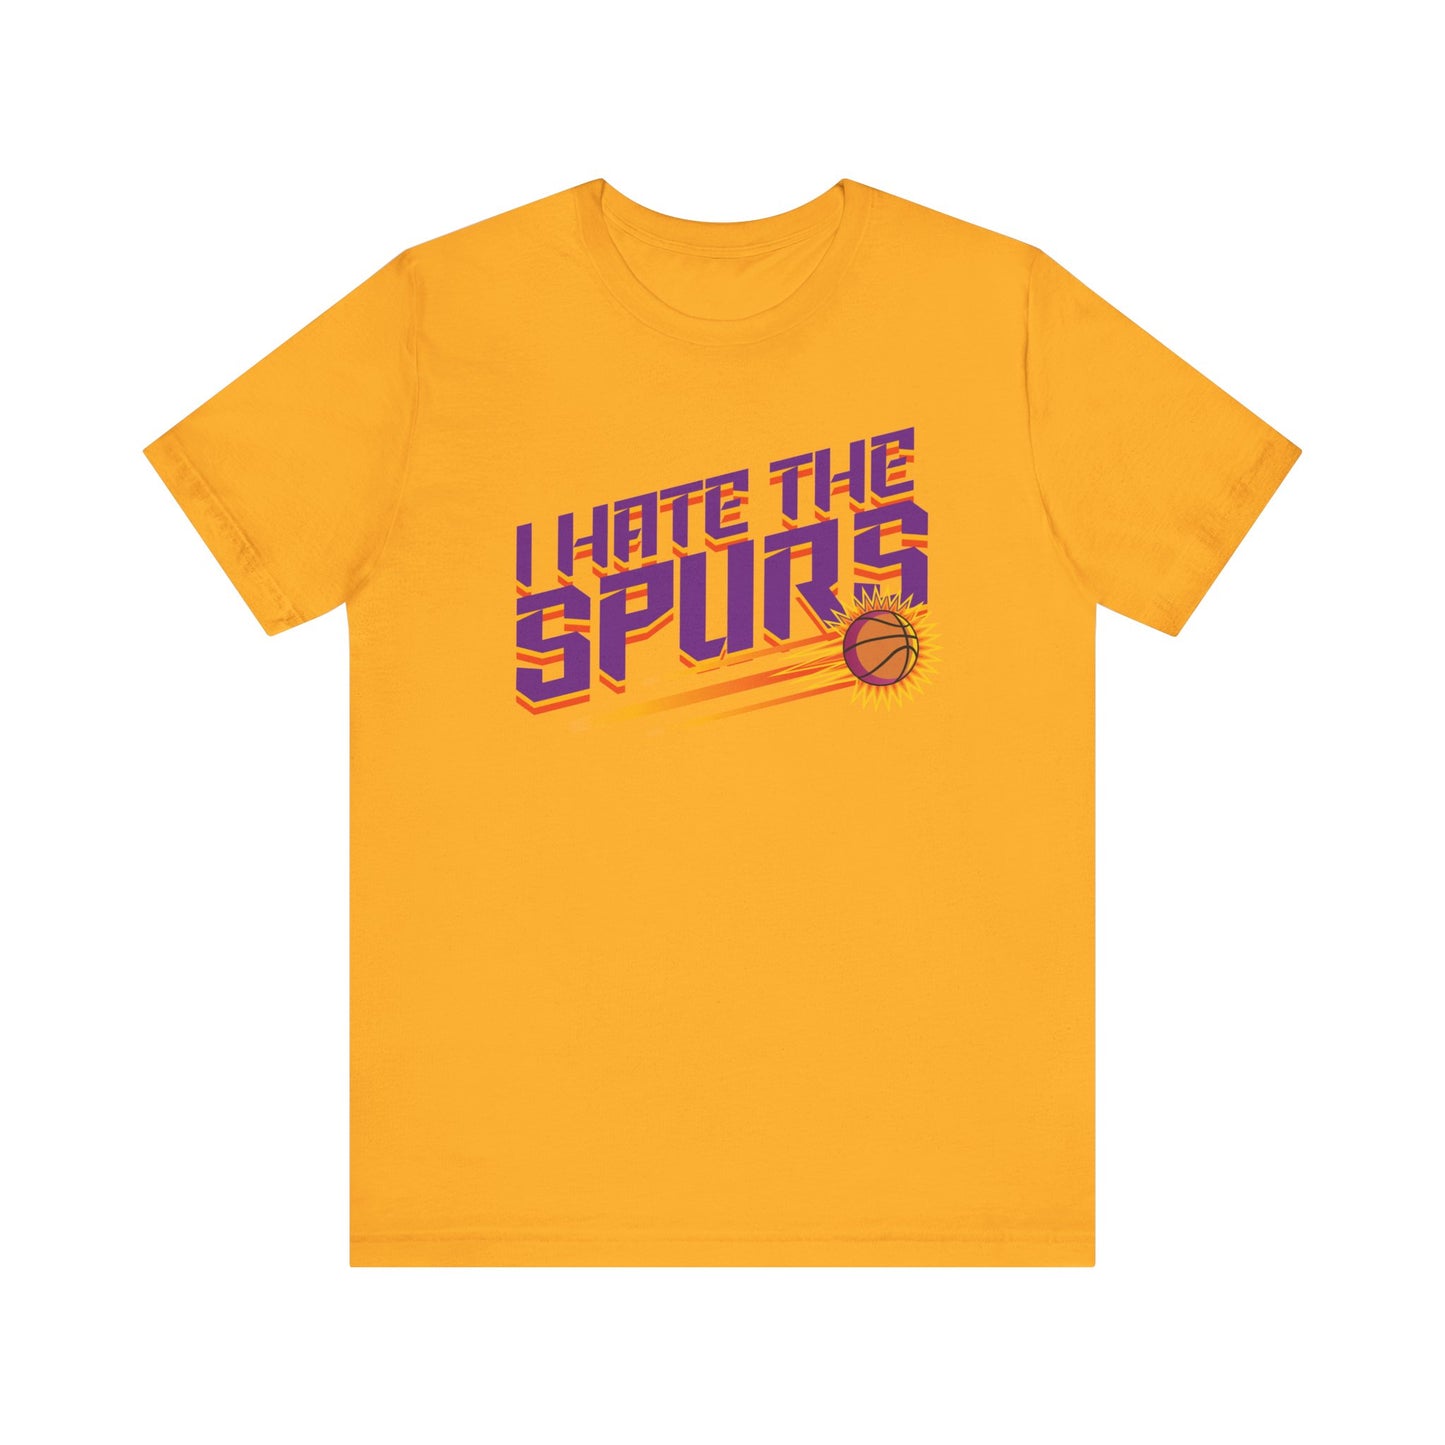 I Hate The Spurz (for Phoenix fans) - Unisex Jersey Short Sleeve Tee